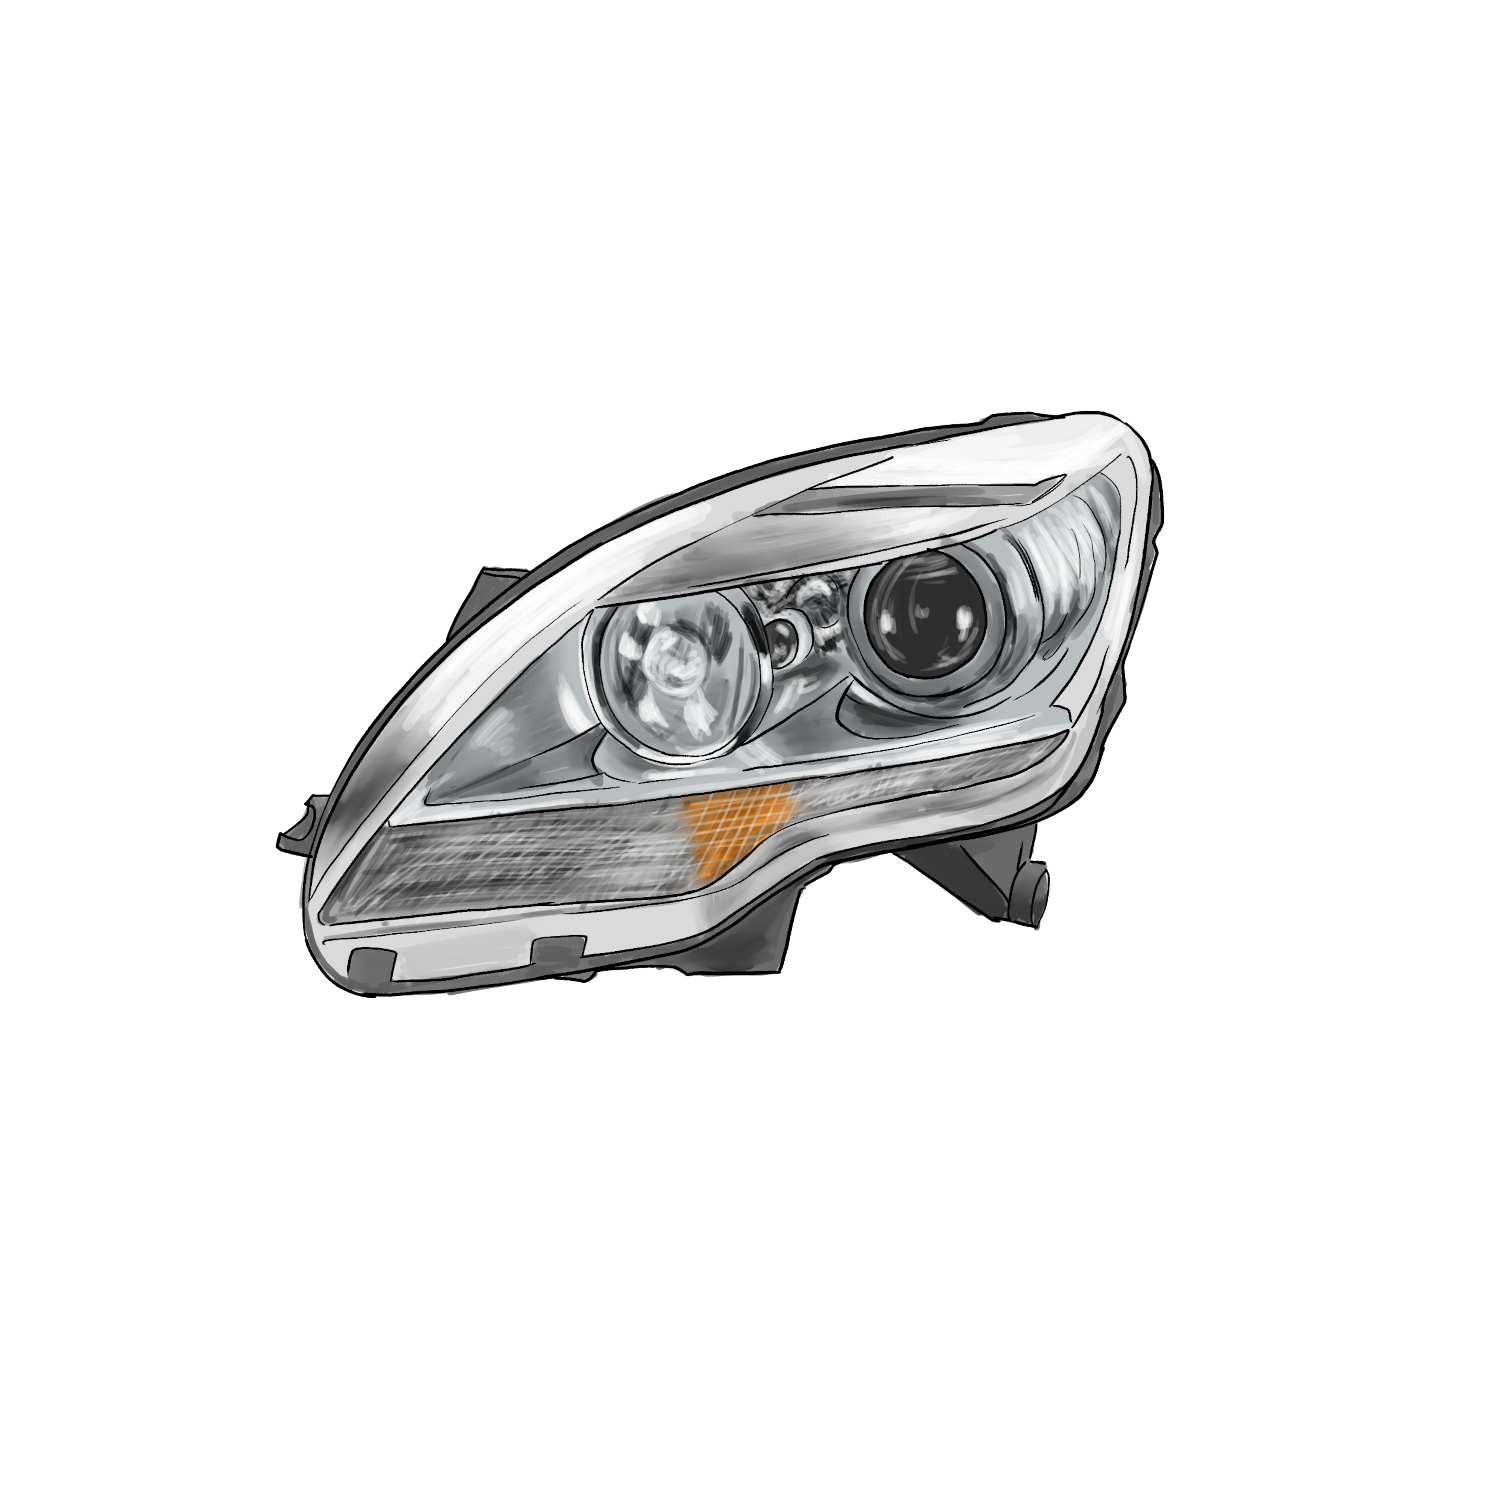  Product image 1 of the product “Headlight OX3 ”